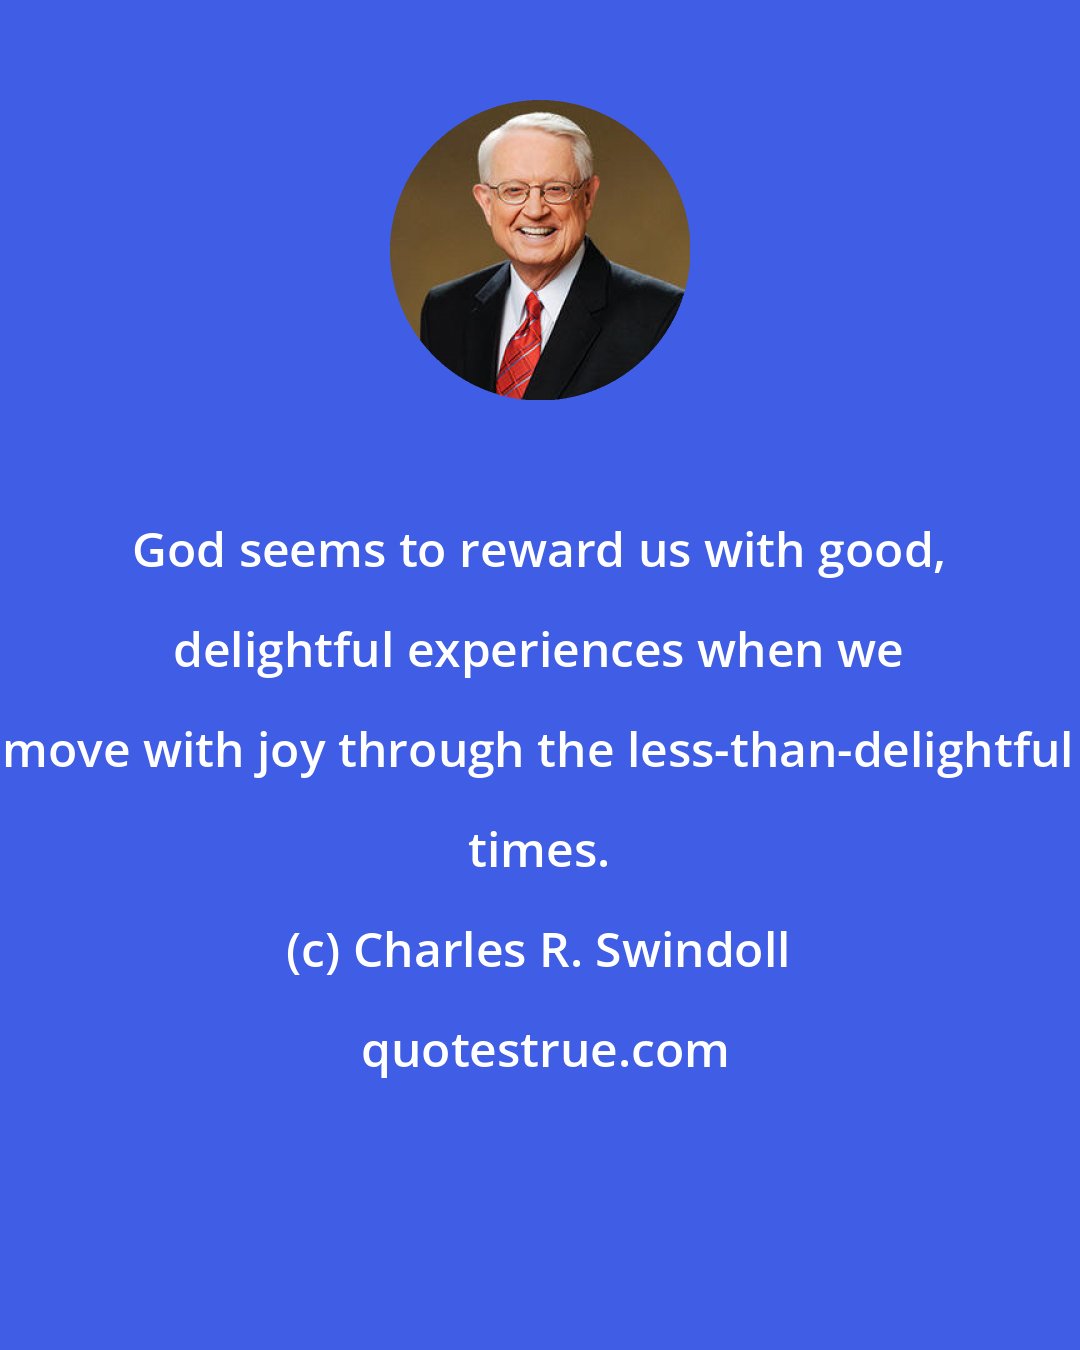 Charles R. Swindoll: God seems to reward us with good, delightful experiences when we move with joy through the less-than-delightful times.